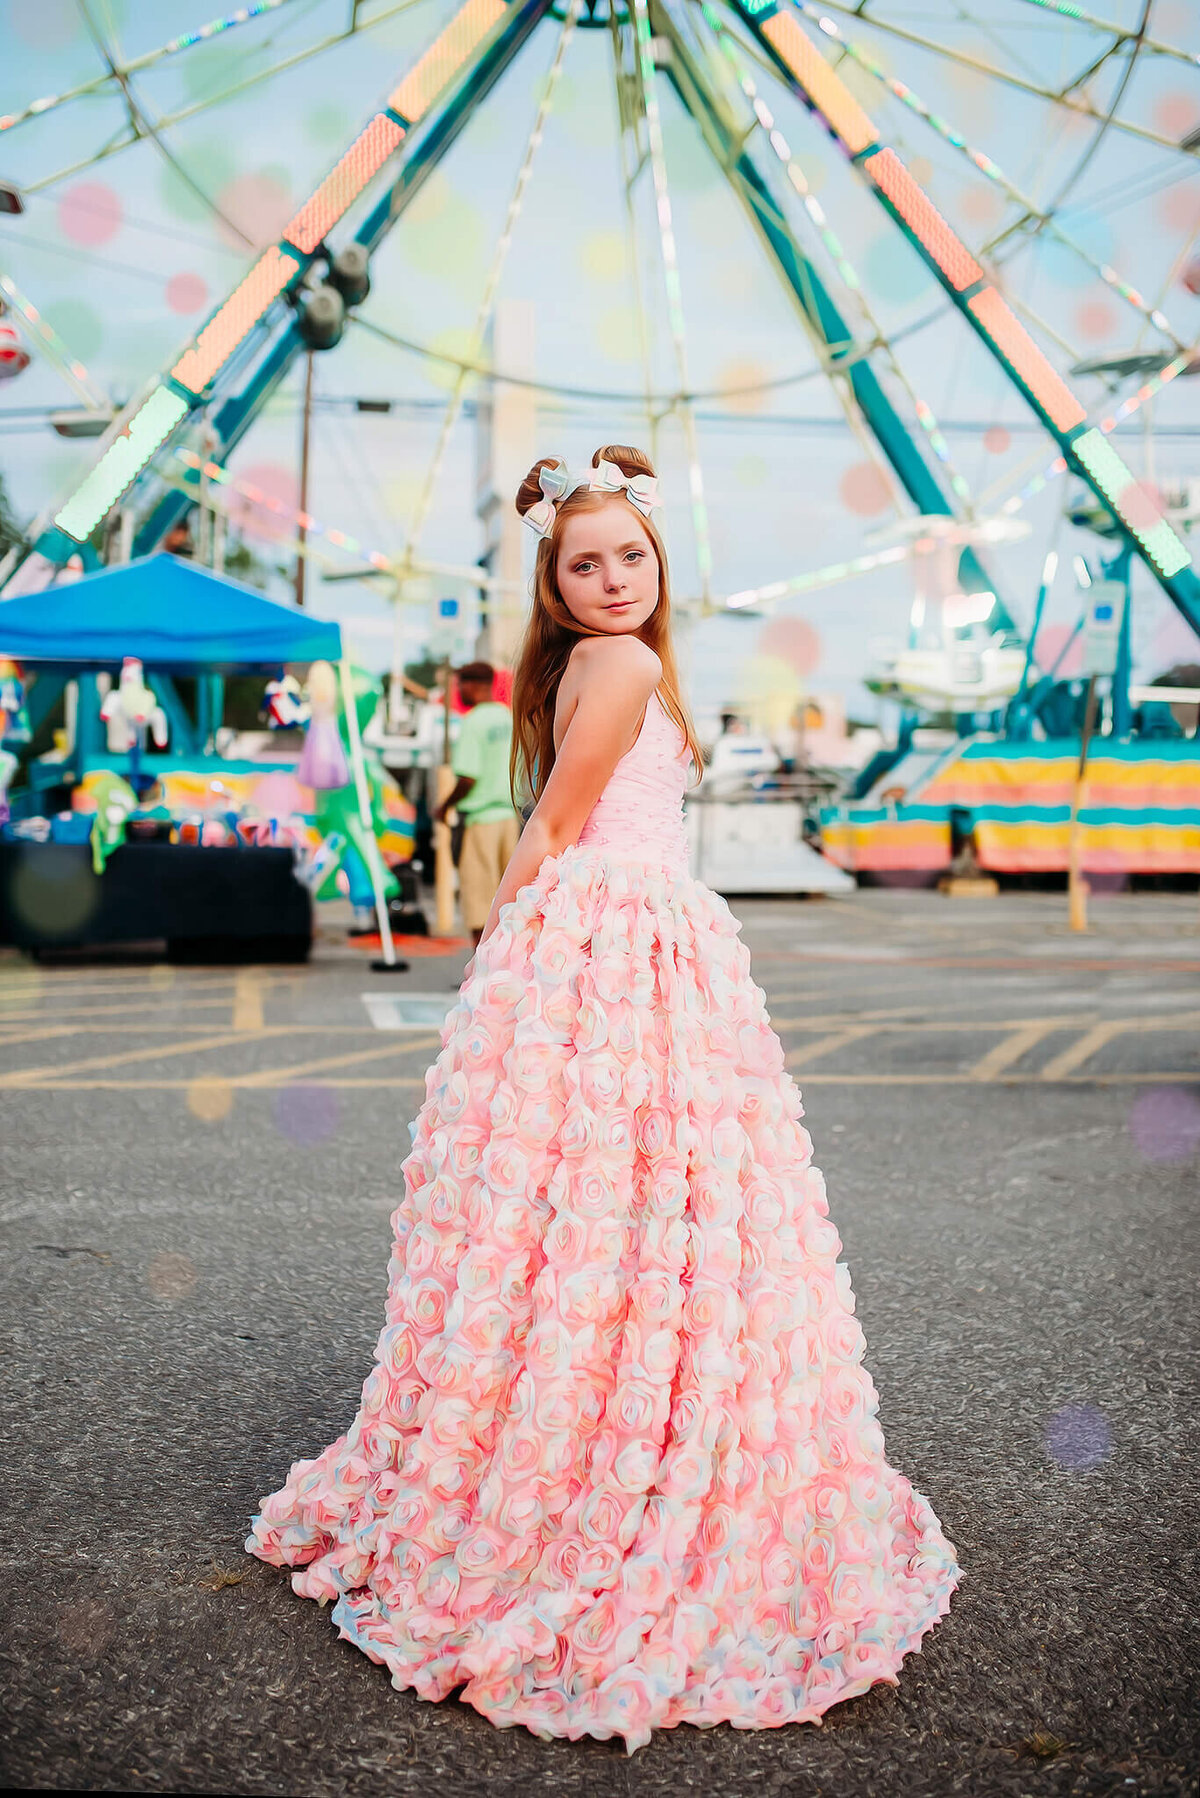 red haired girl in a pink rainbow dress standing in front of a ferris wheel at a carnival near Annapolis Maryland